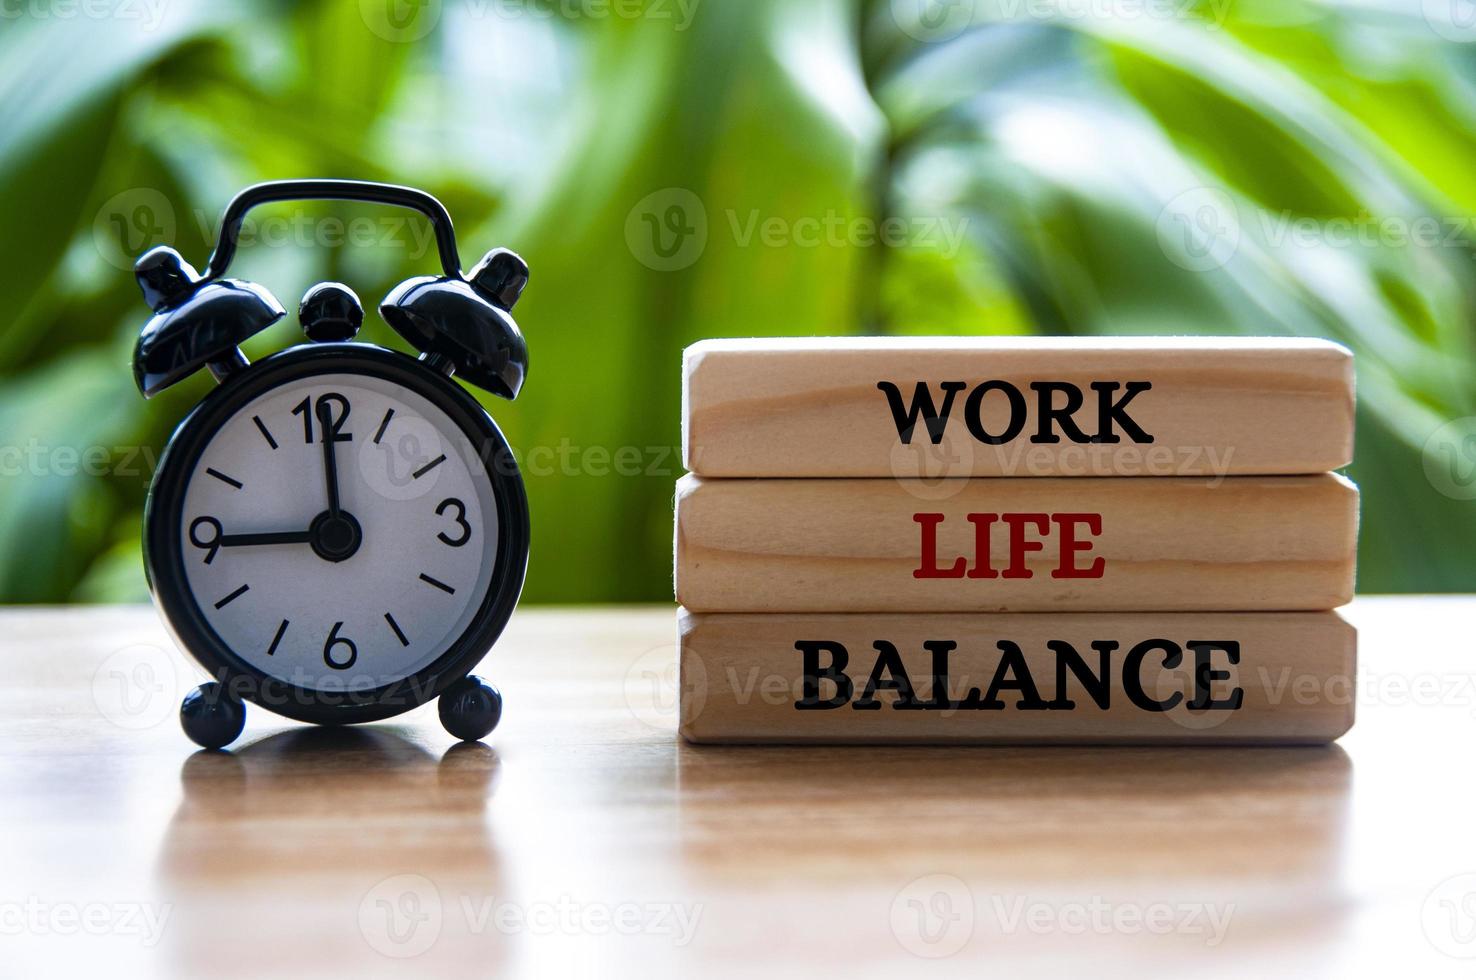 Alarm clock pointing at 9am with work life balance text on wooden blocks. Work life balance concept photo